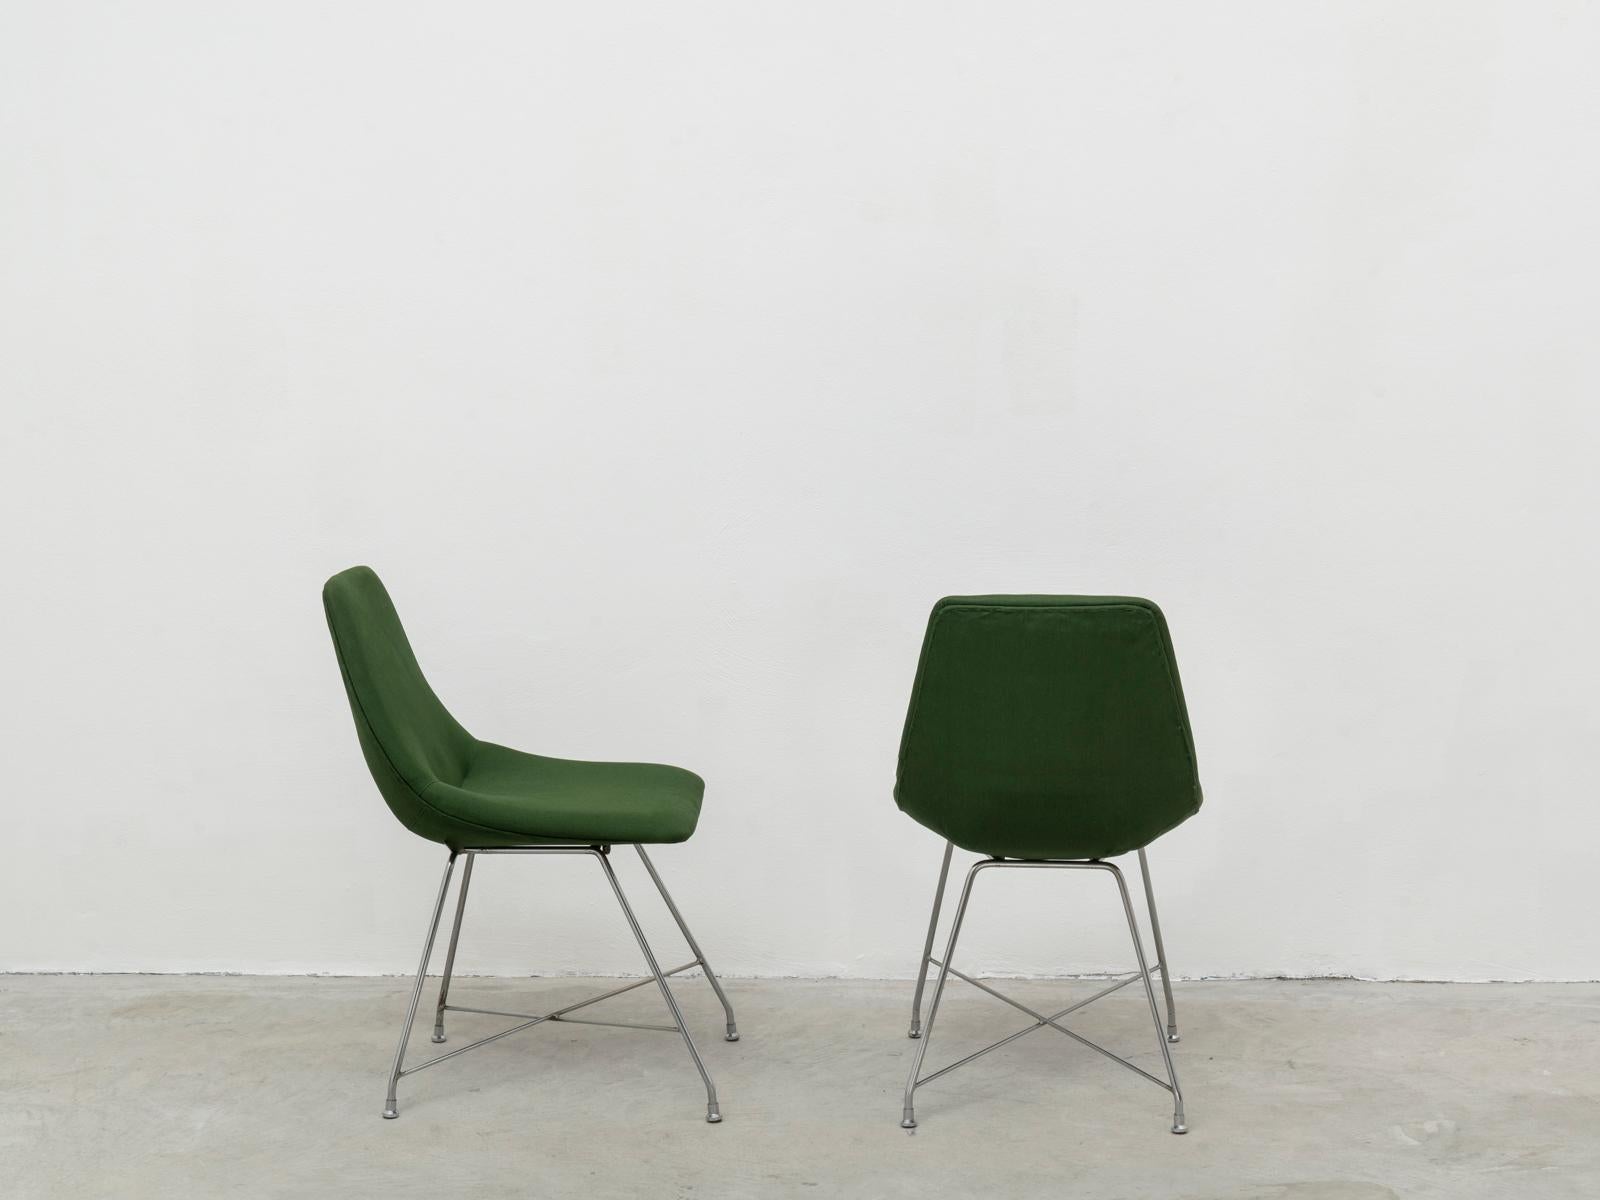 Set of 4 iconic chairs, model Aster, designed by Augusto Bozzi for Saporiti in 1954. This set was likely produced in the early 1960s. Rarer version with chromed-plated base, with patina. Stronger oxidation on one base out of four. The chairs have